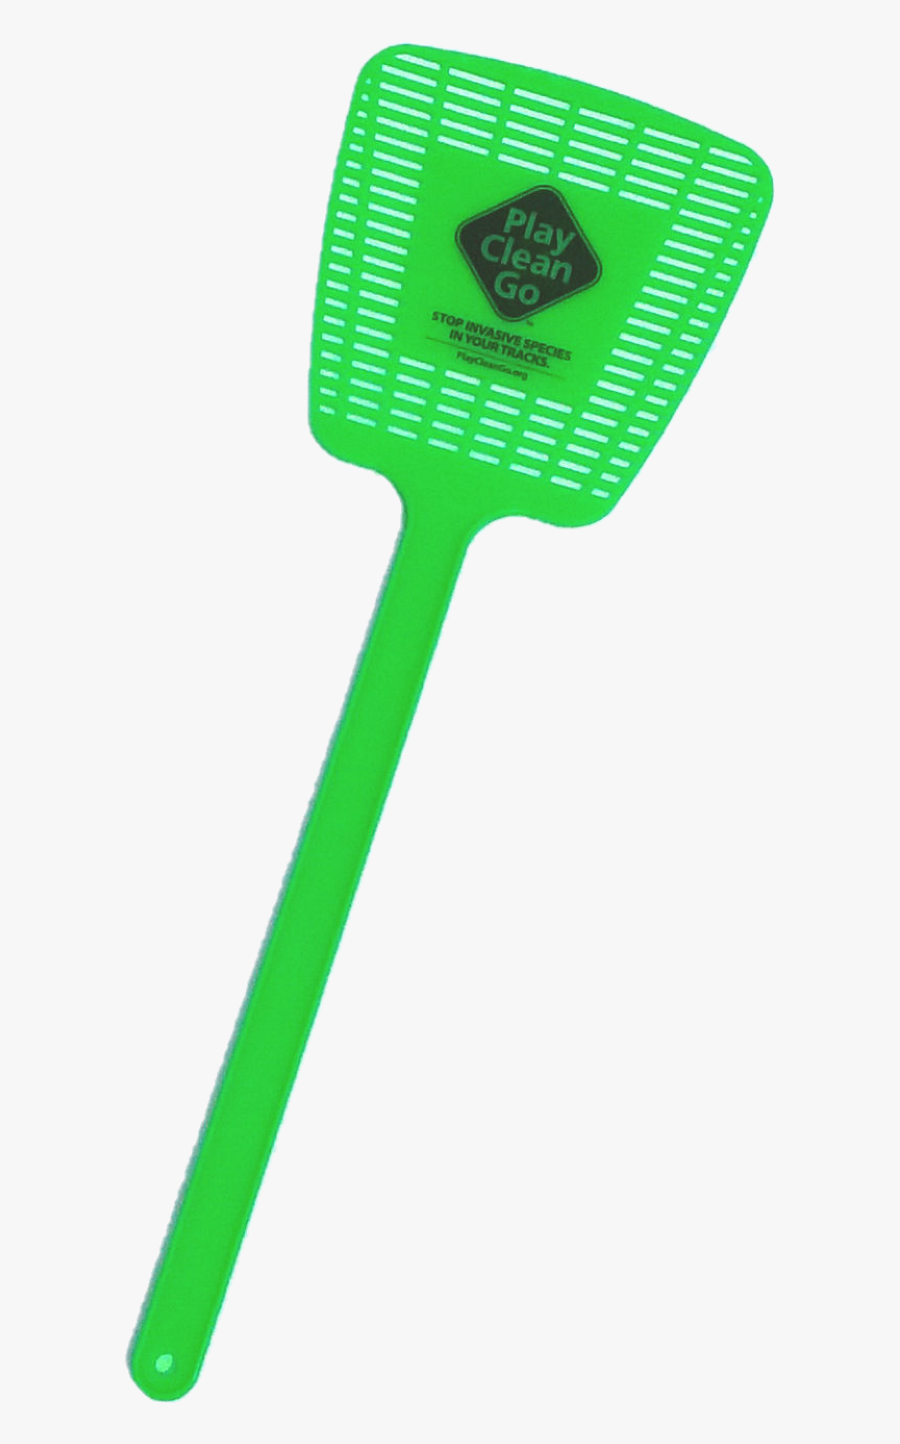 Fly Swatter Png - Fly Swatter Transparent Background, Transparent Clipart